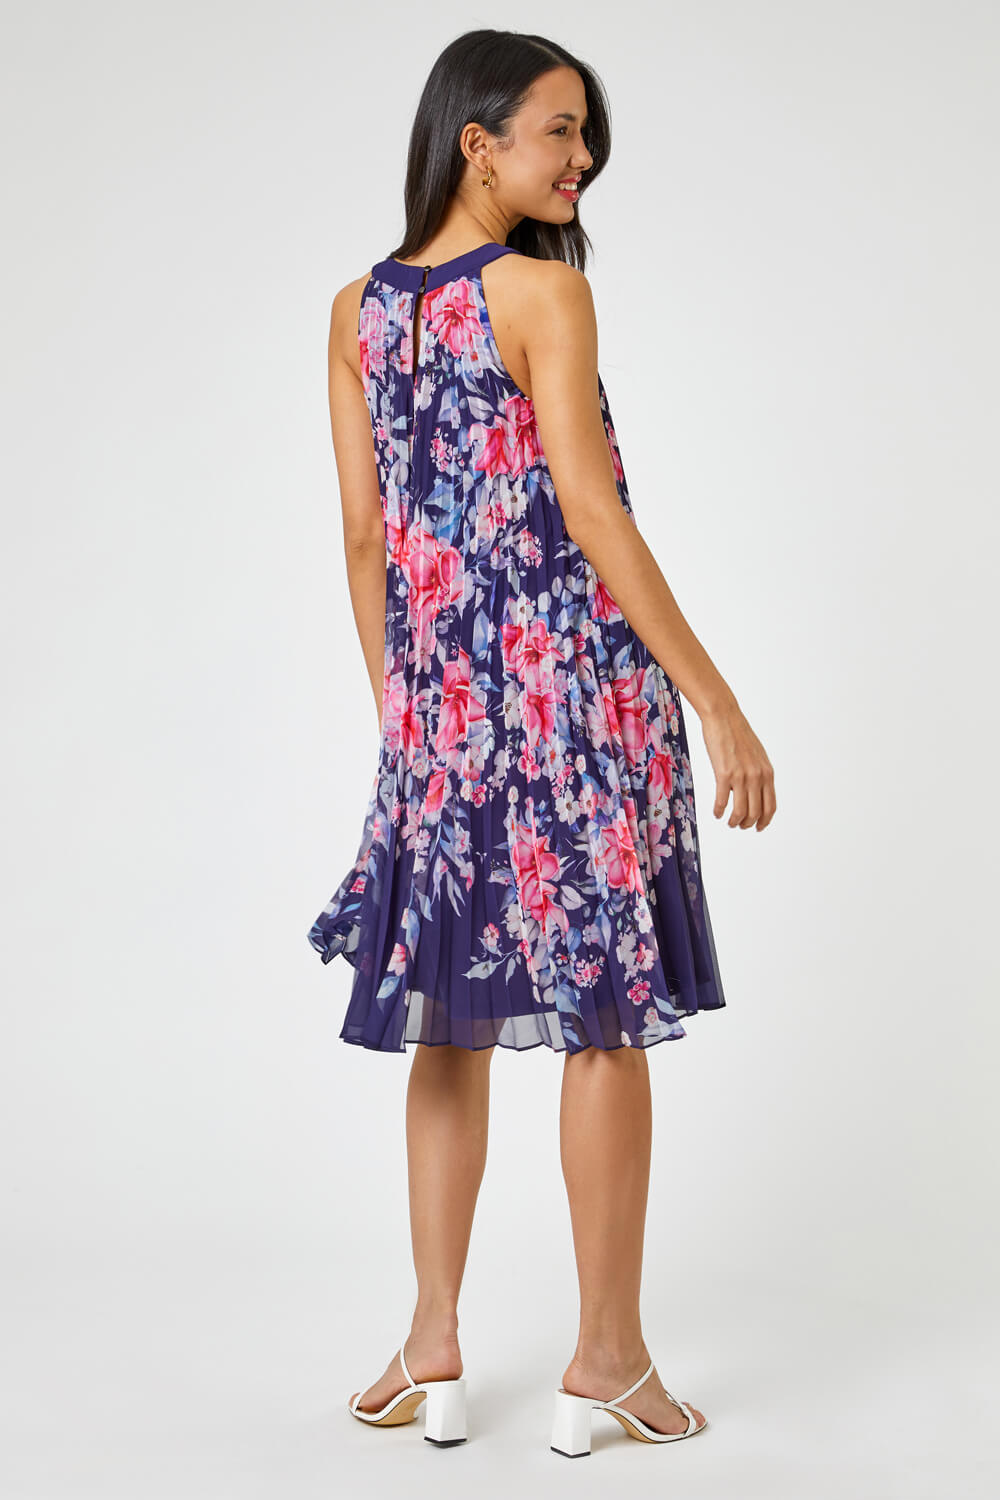 Navy  Floral High Neck Pleated Chiffon Swing Dress, Image 2 of 5